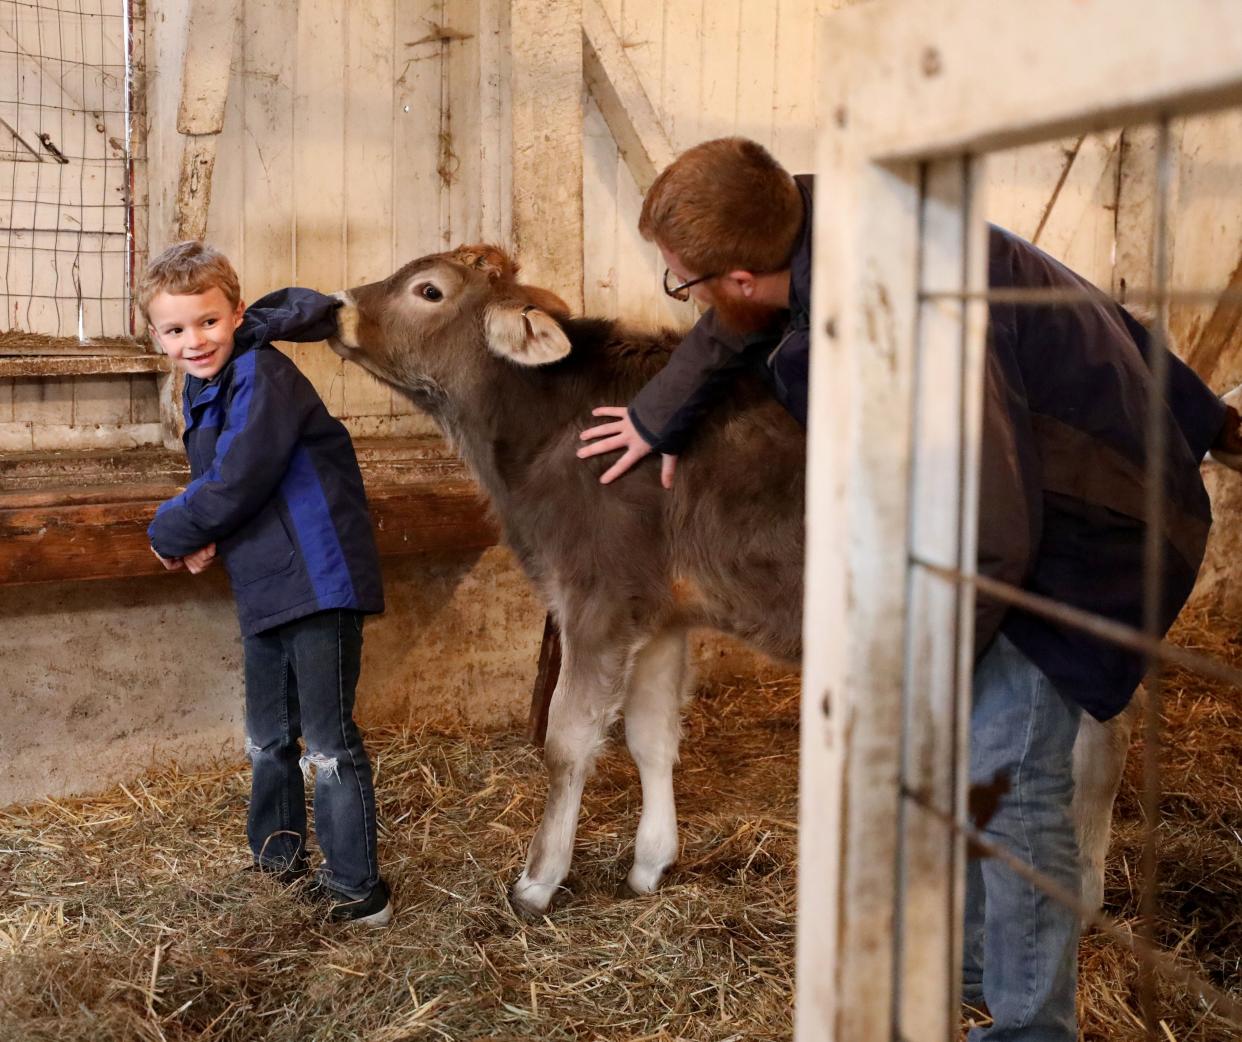 Harrison Kloehn, 7 1/2, from Valhalla gets up close and personal with a 5-month old Brown Swiss calf at the Alfred B. Delbello Muscoot Farm Park in Somers, as Jonathon Benjamin, the curator prepares the animals for the winter months, Dec. 29, 2018. 